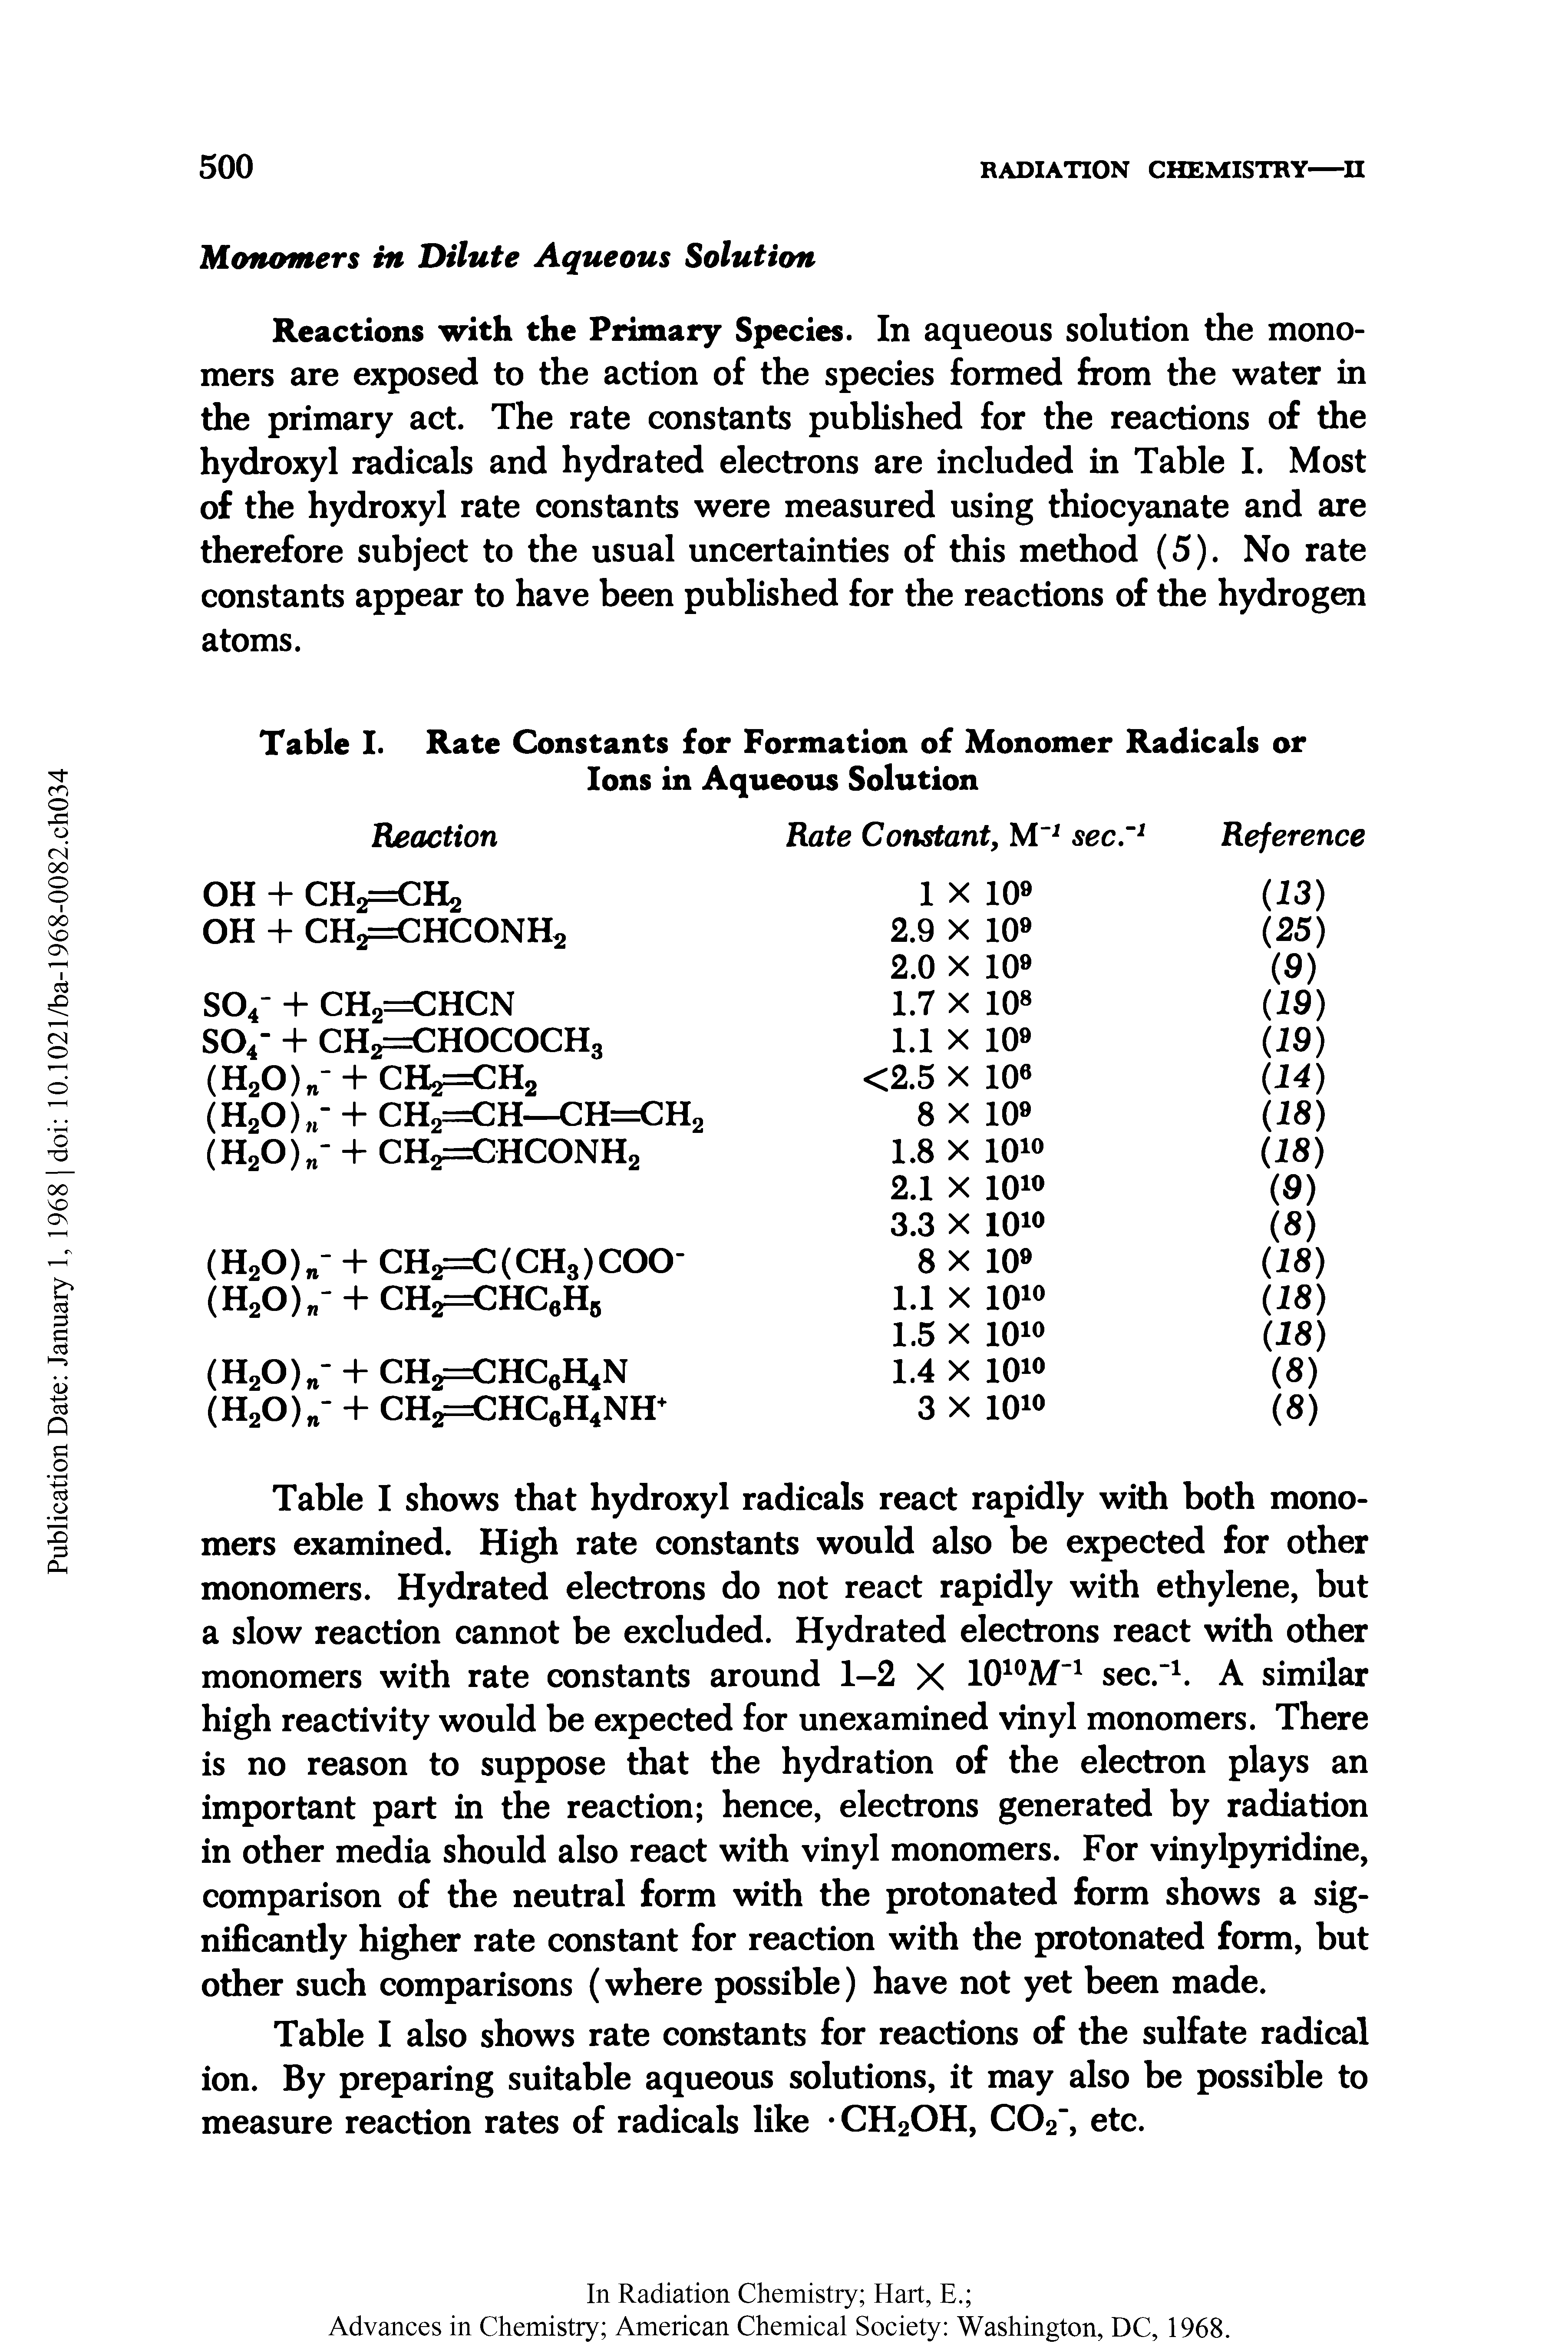 Table I shows that hydroxyl radicals react rapidly with both monomers examined. High rate constants would also be expected for other monomers. Hydrated electrons do not react rapidly with ethylene, but a slow reaction cannot be excluded. Hydrated electrons react with other monomers with rate constants around 1-2 X 1010M-1 sec."1. A similar high reactivity would be expected for unexamined vinyl monomers. There is no reason to suppose that the hydration of the electron plays an important part in the reaction hence, electrons generated by radiation in other media should also react with vinyl monomers. For vinylpyridine, comparison of the neutral form with the protonated form shows a significantly higher rate constant for reaction with the protonated form, but other such comparisons (where possible) have not yet been made.